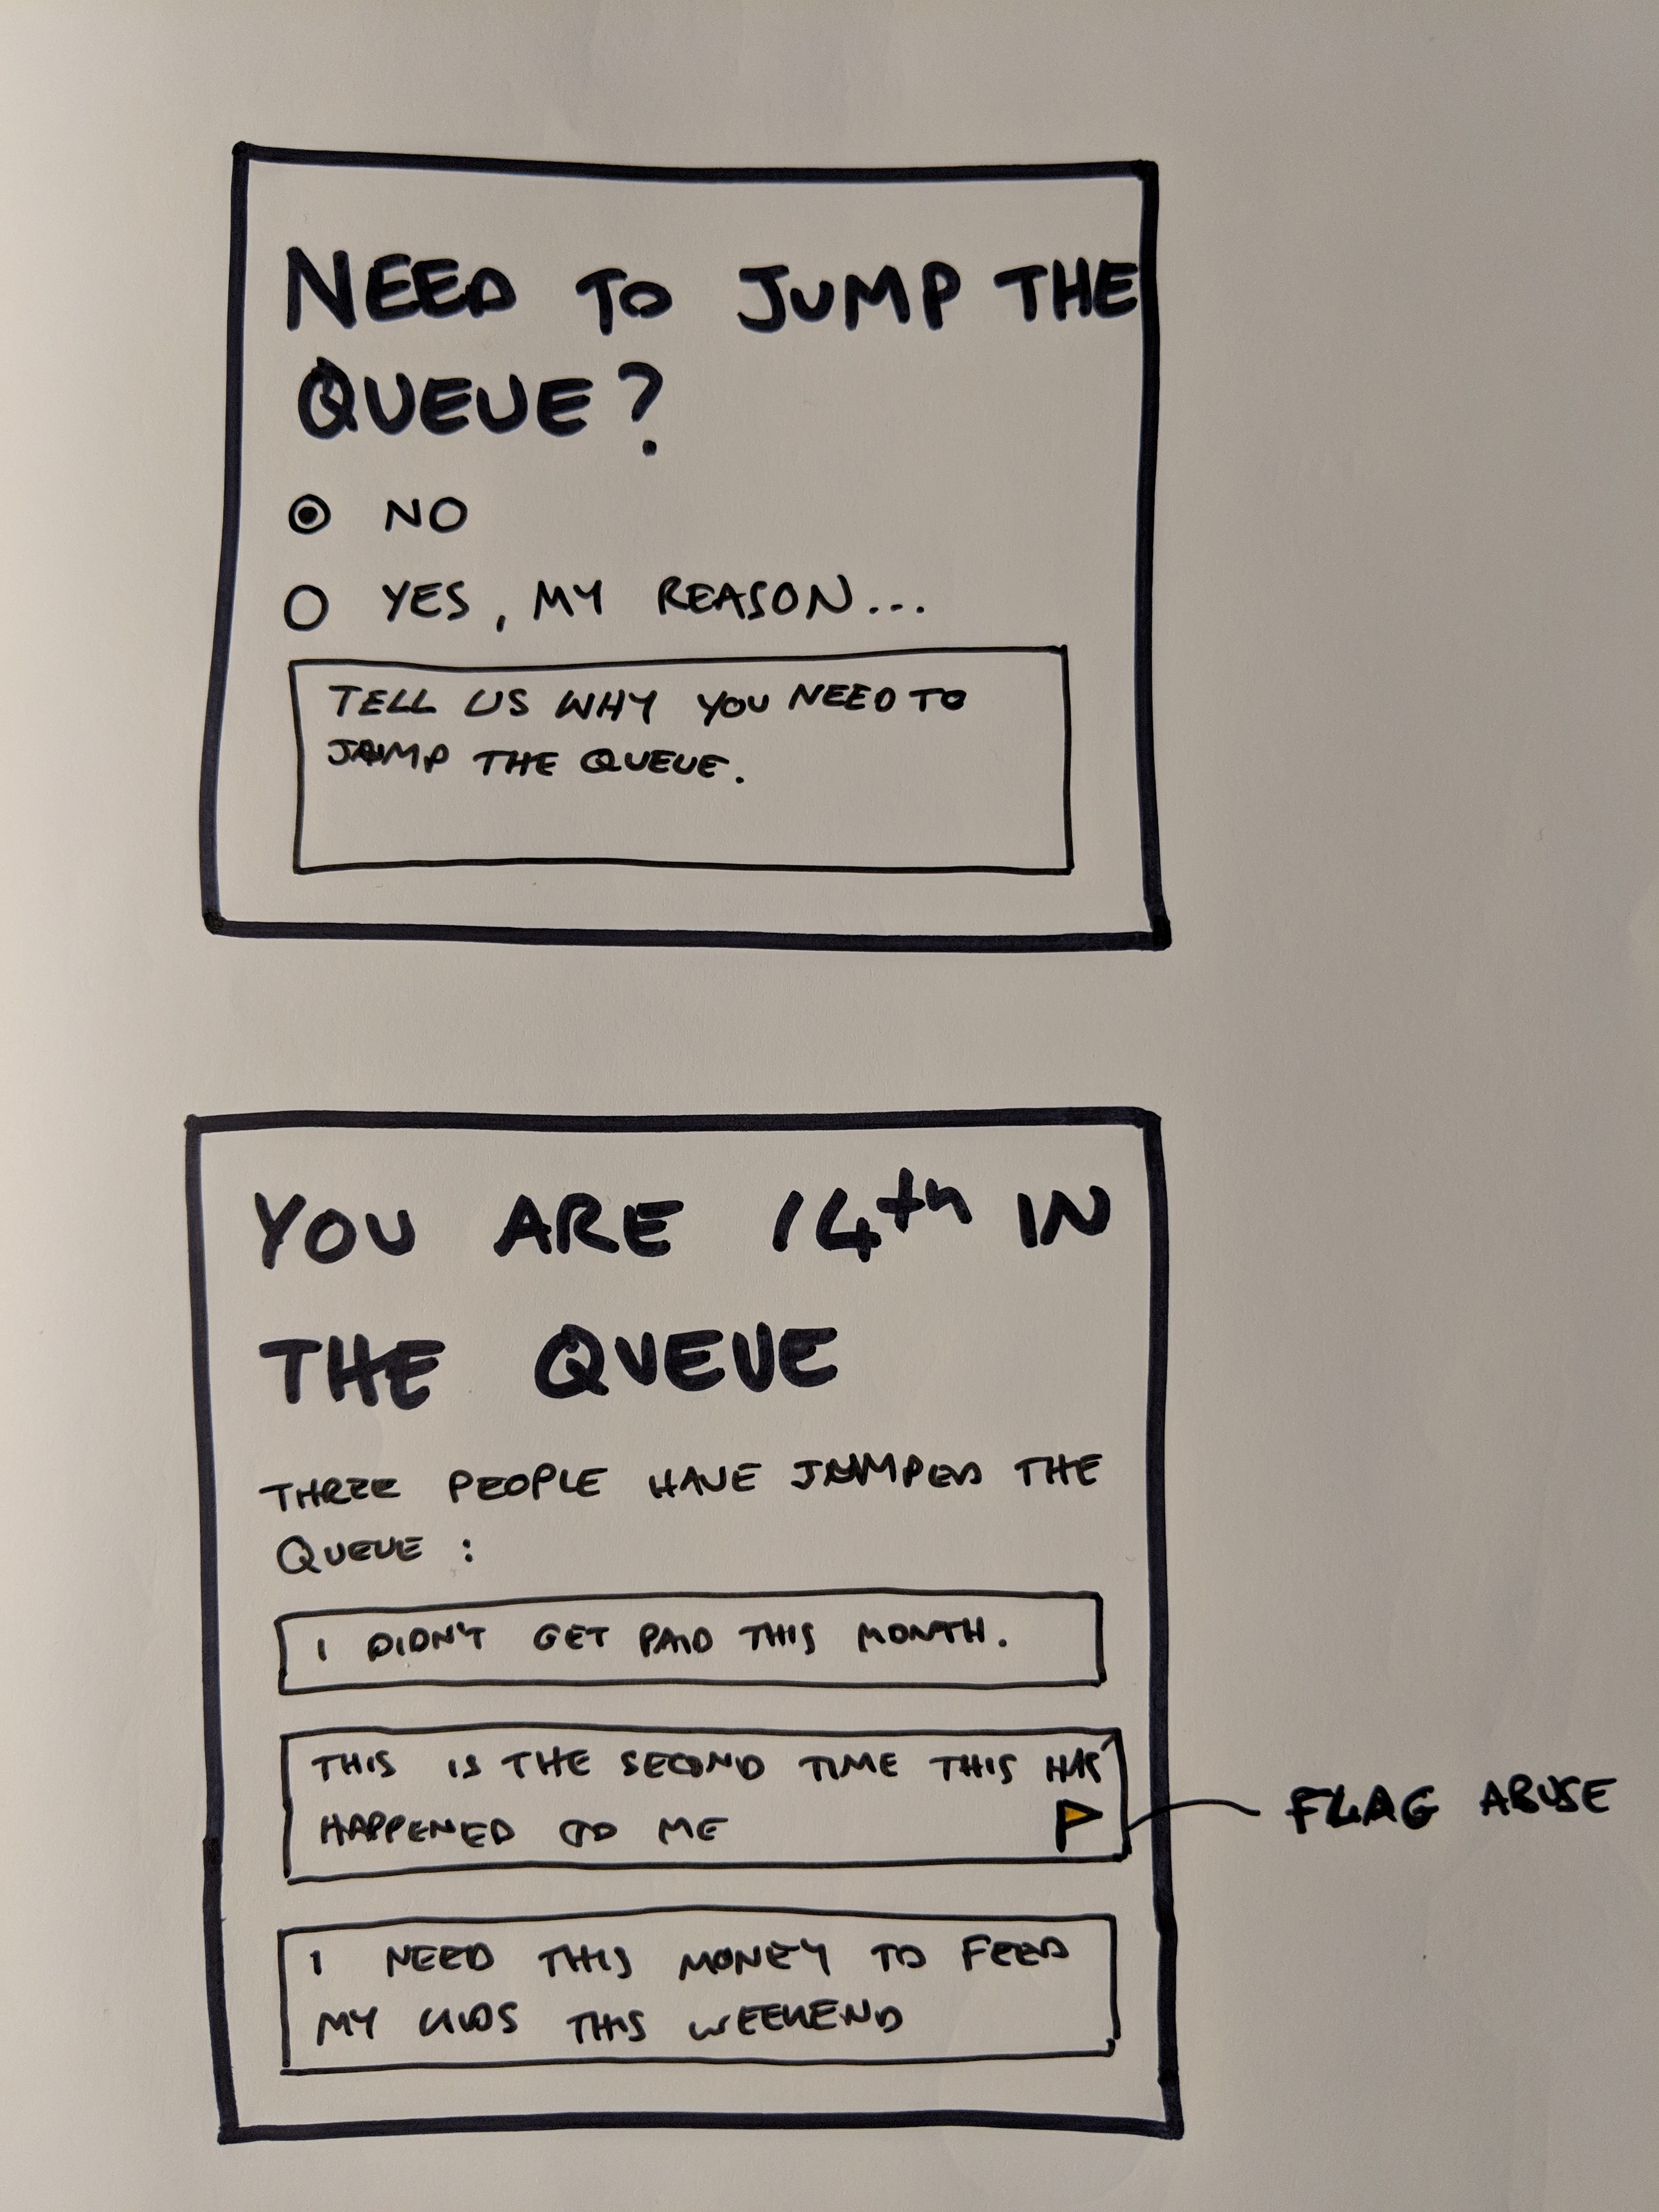 Two sketches. First one shows a dialogue box asking users if they need to jump the queue and inviting them to provide a reason. The second one shows the user their position in the queue. The text reads, You are 14th in the queue, three people have jumped the queue